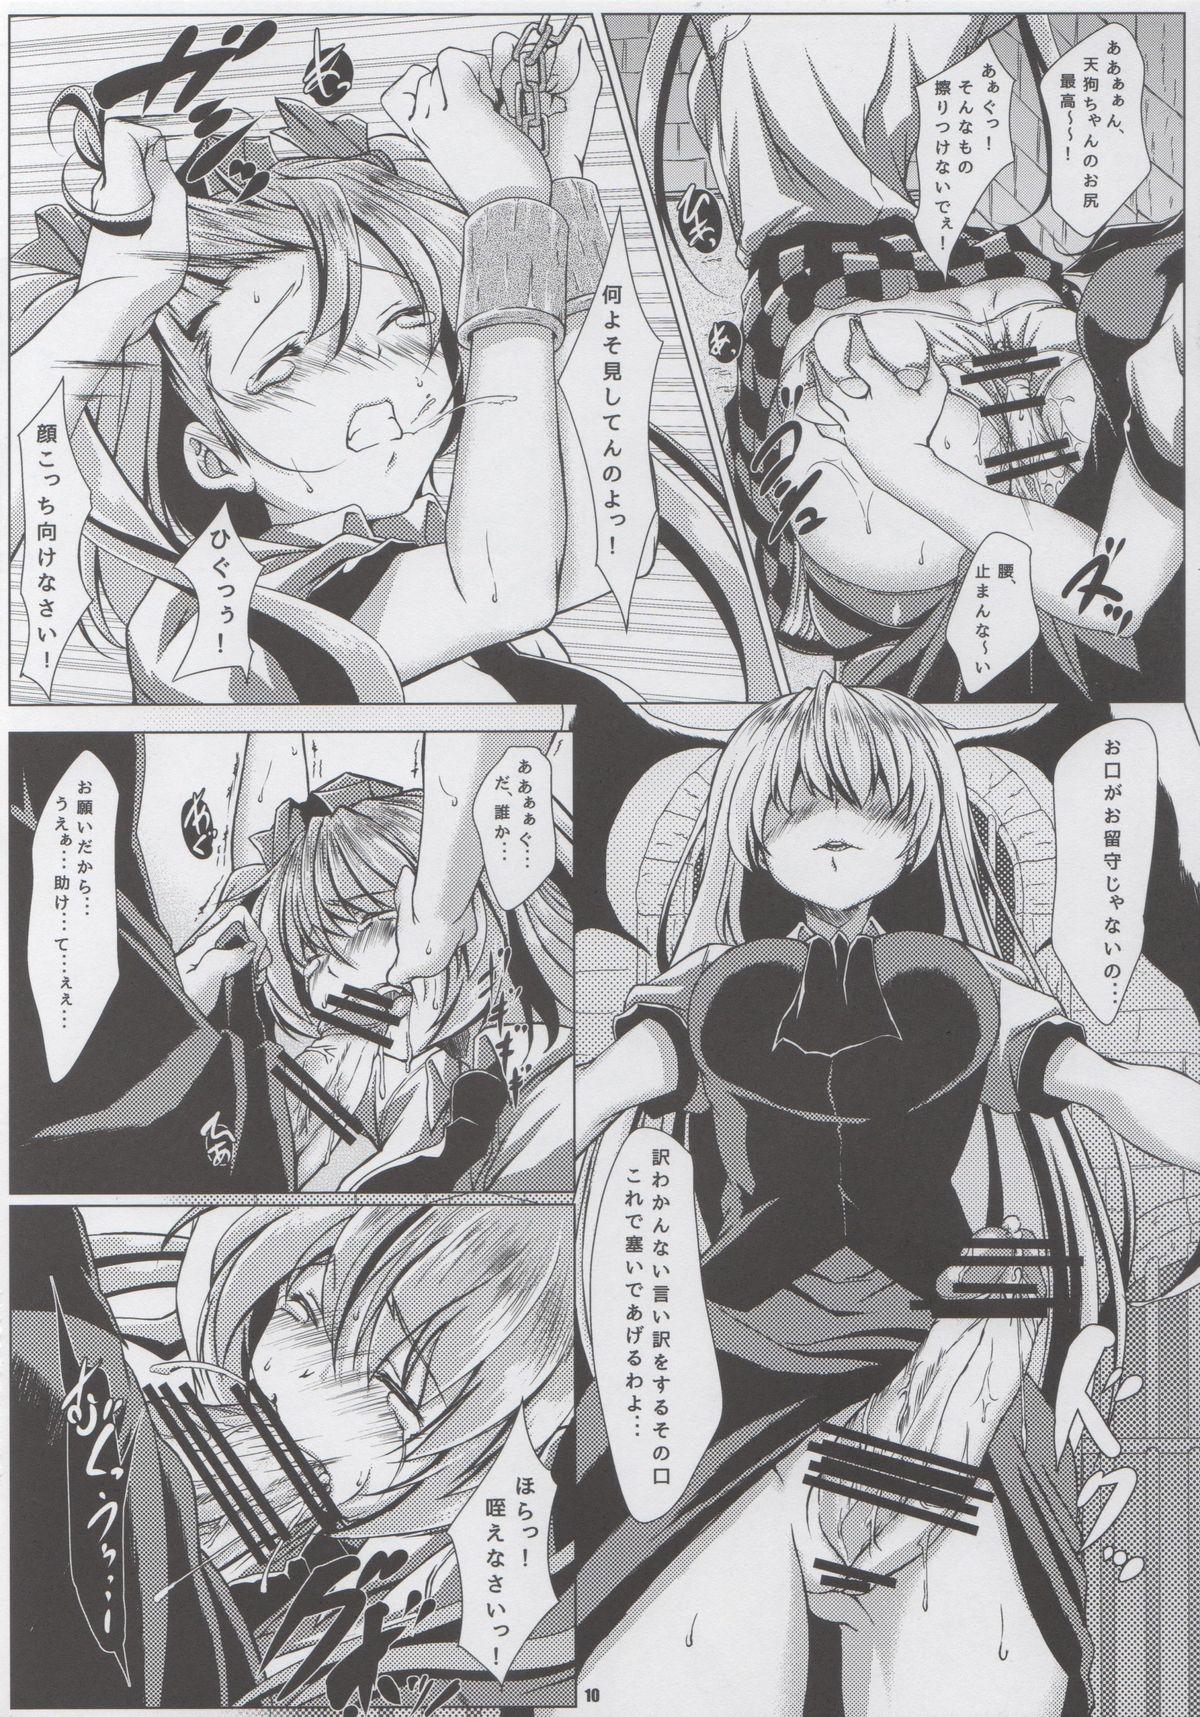 Cams Touhouhimekamiden San - Touhou project Ball Busting - Page 9